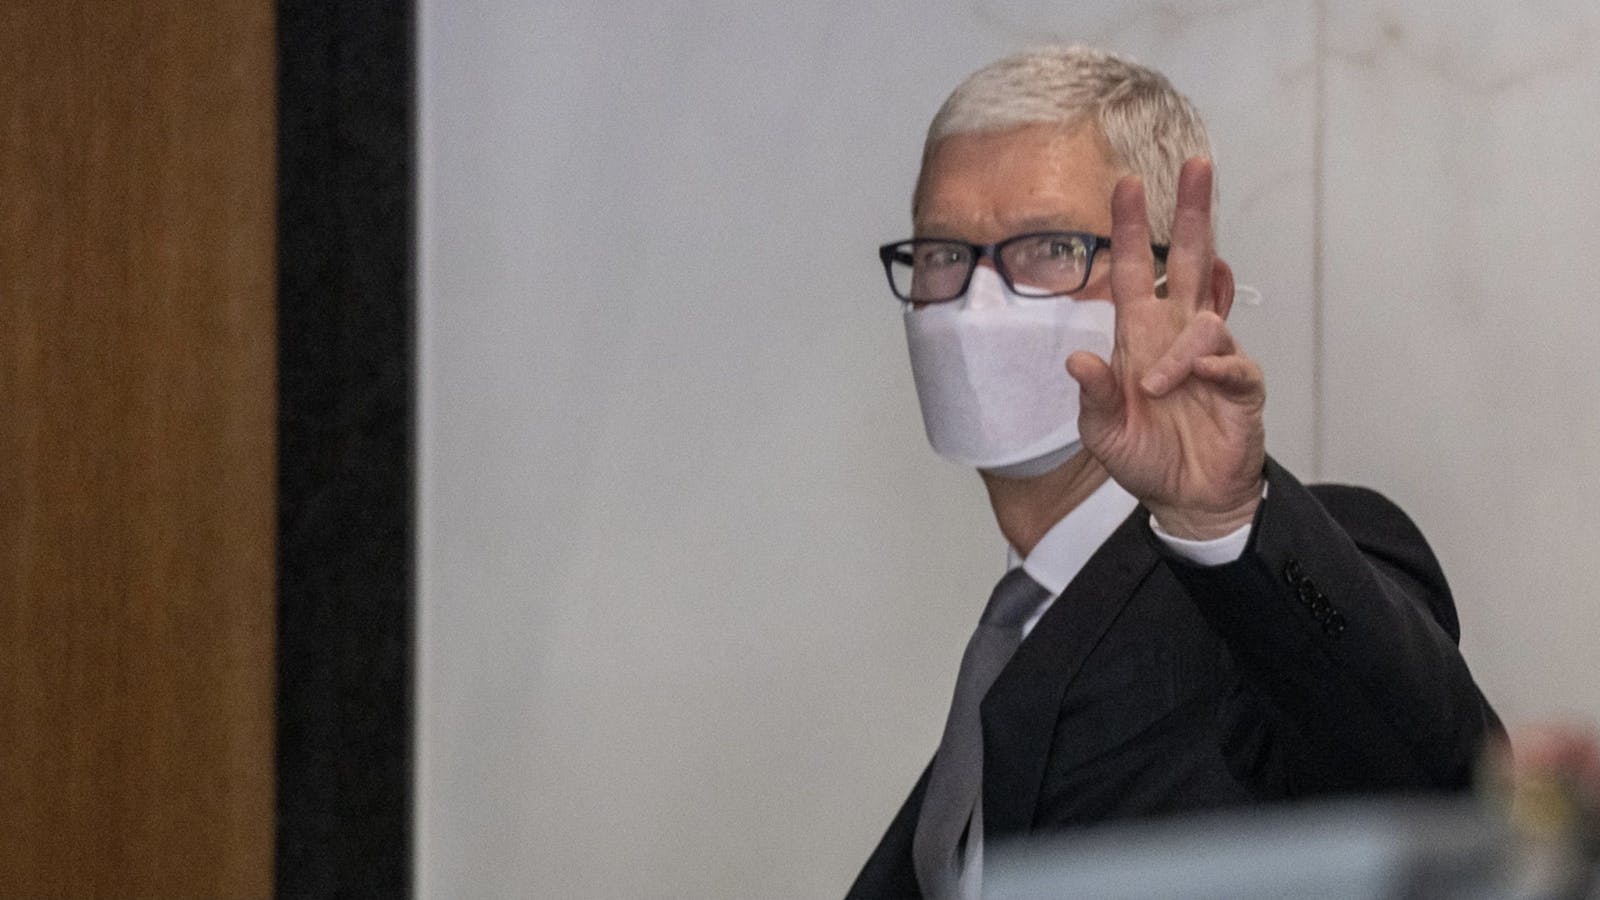 Apple CEO Tim Cook at the Epic trial in May. Photo by Bloomberg.